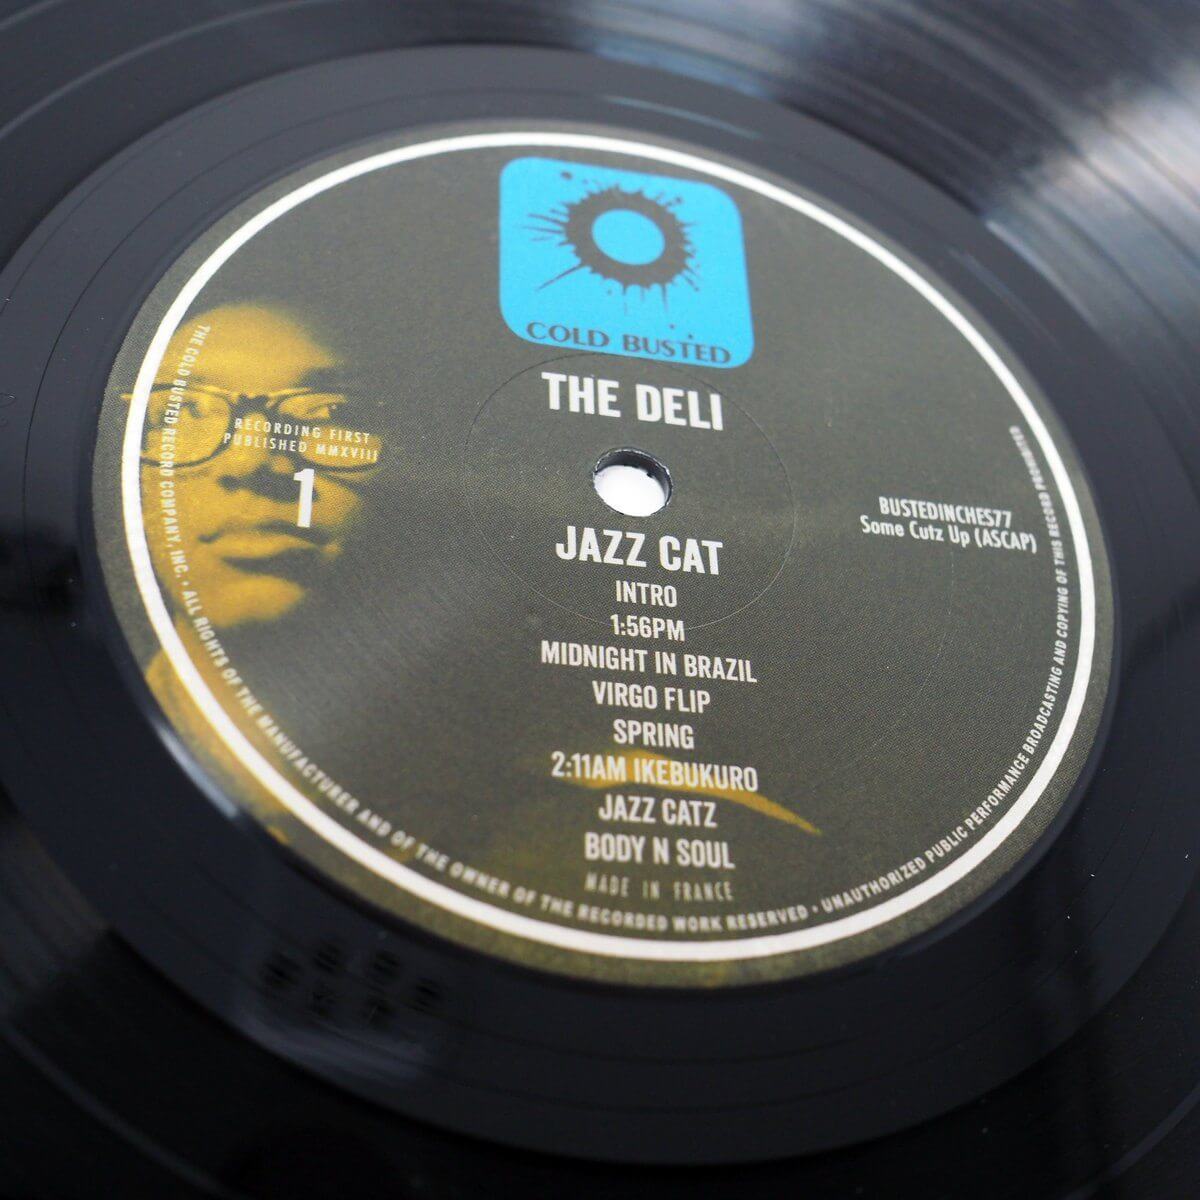 The Deli - Jazz Cat - Limited Edition 12 Inch Vinyl - Cold Busted